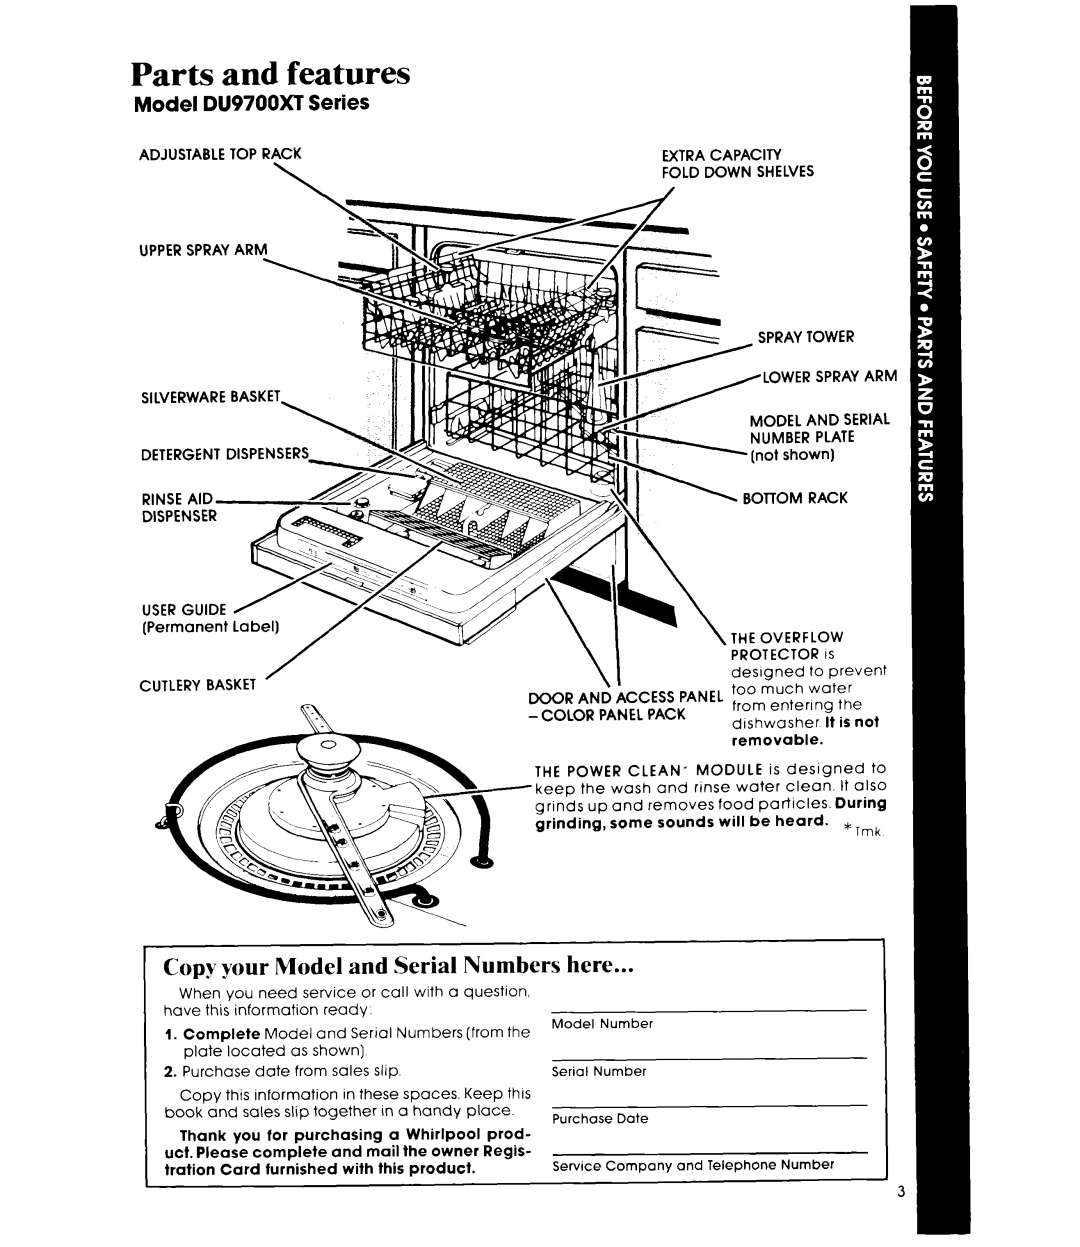 Whirlpool manual Parts and features, Copy your Model and Serial Numbers here, Model DU9700XT Series 